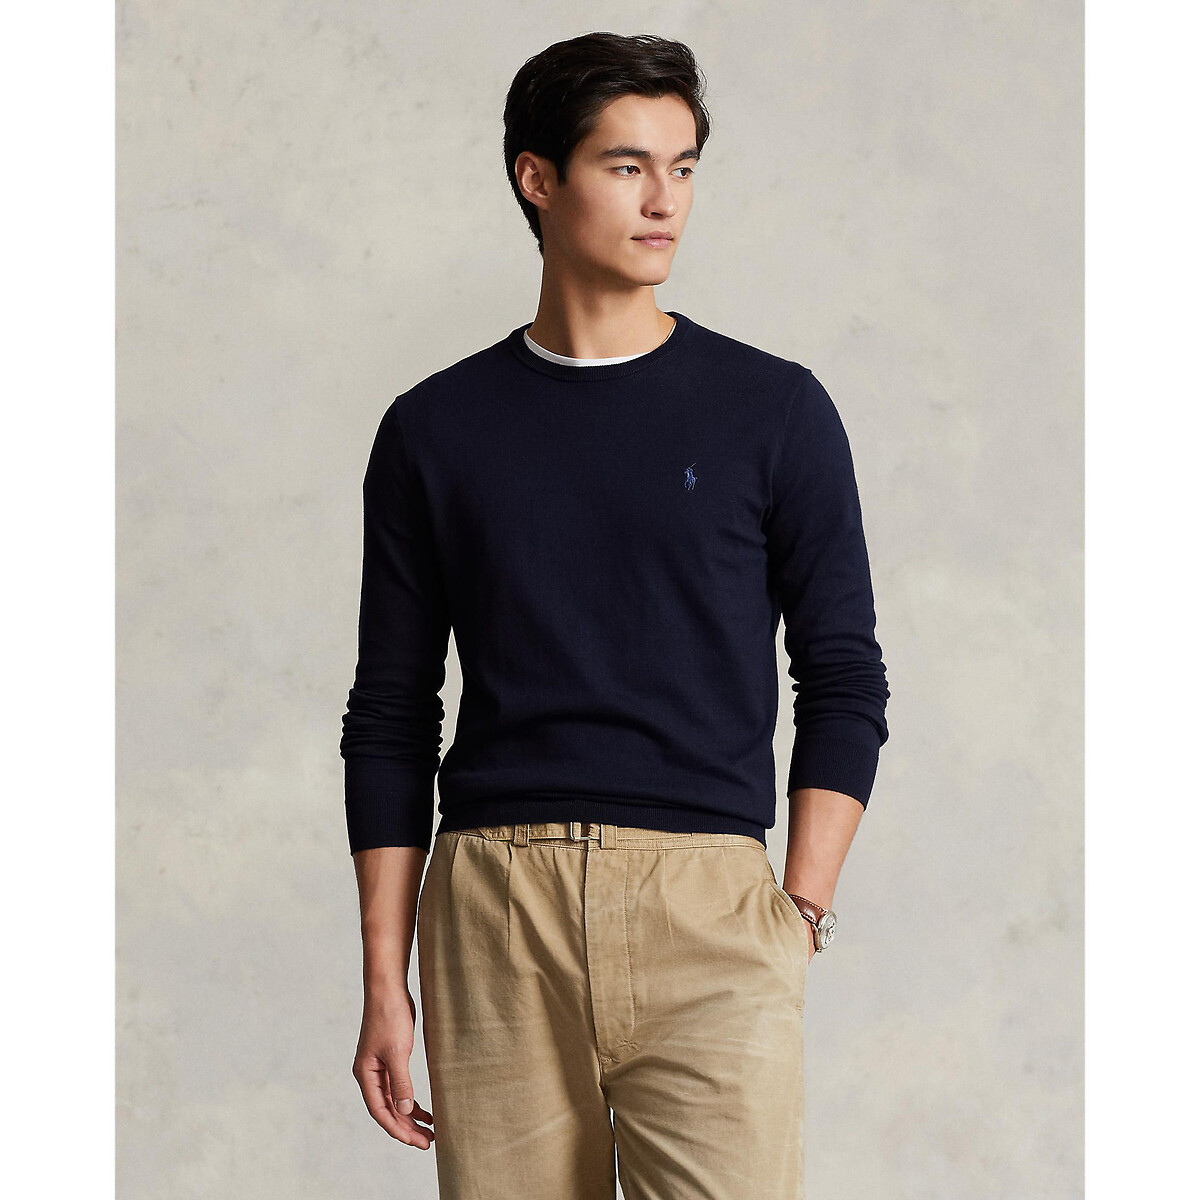 Cotton cable knitted sweater in neutrals - Polo Ralph Lauren